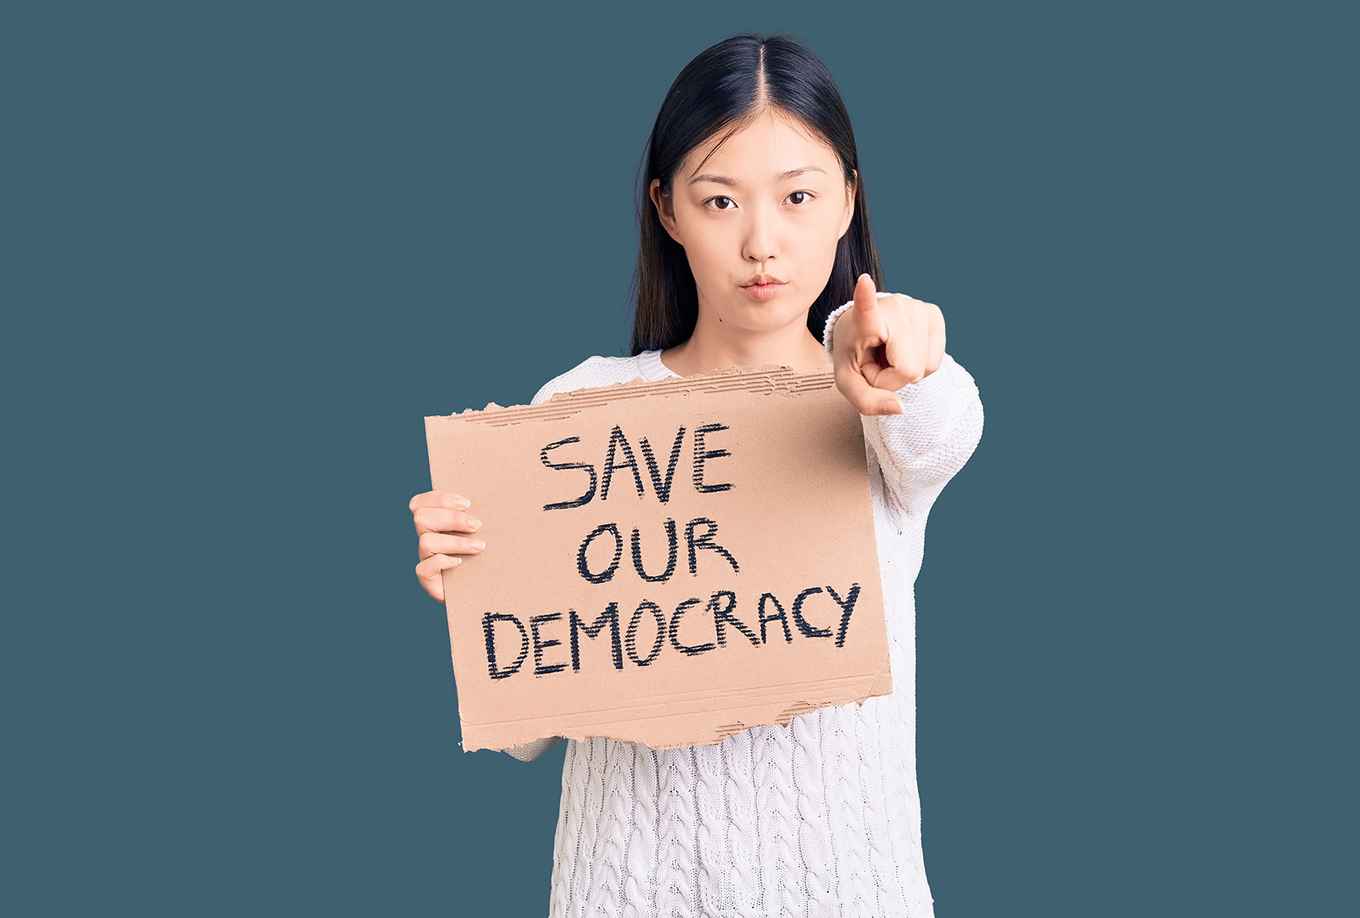 girl holding cardboard on which is written 'Save our democracy'